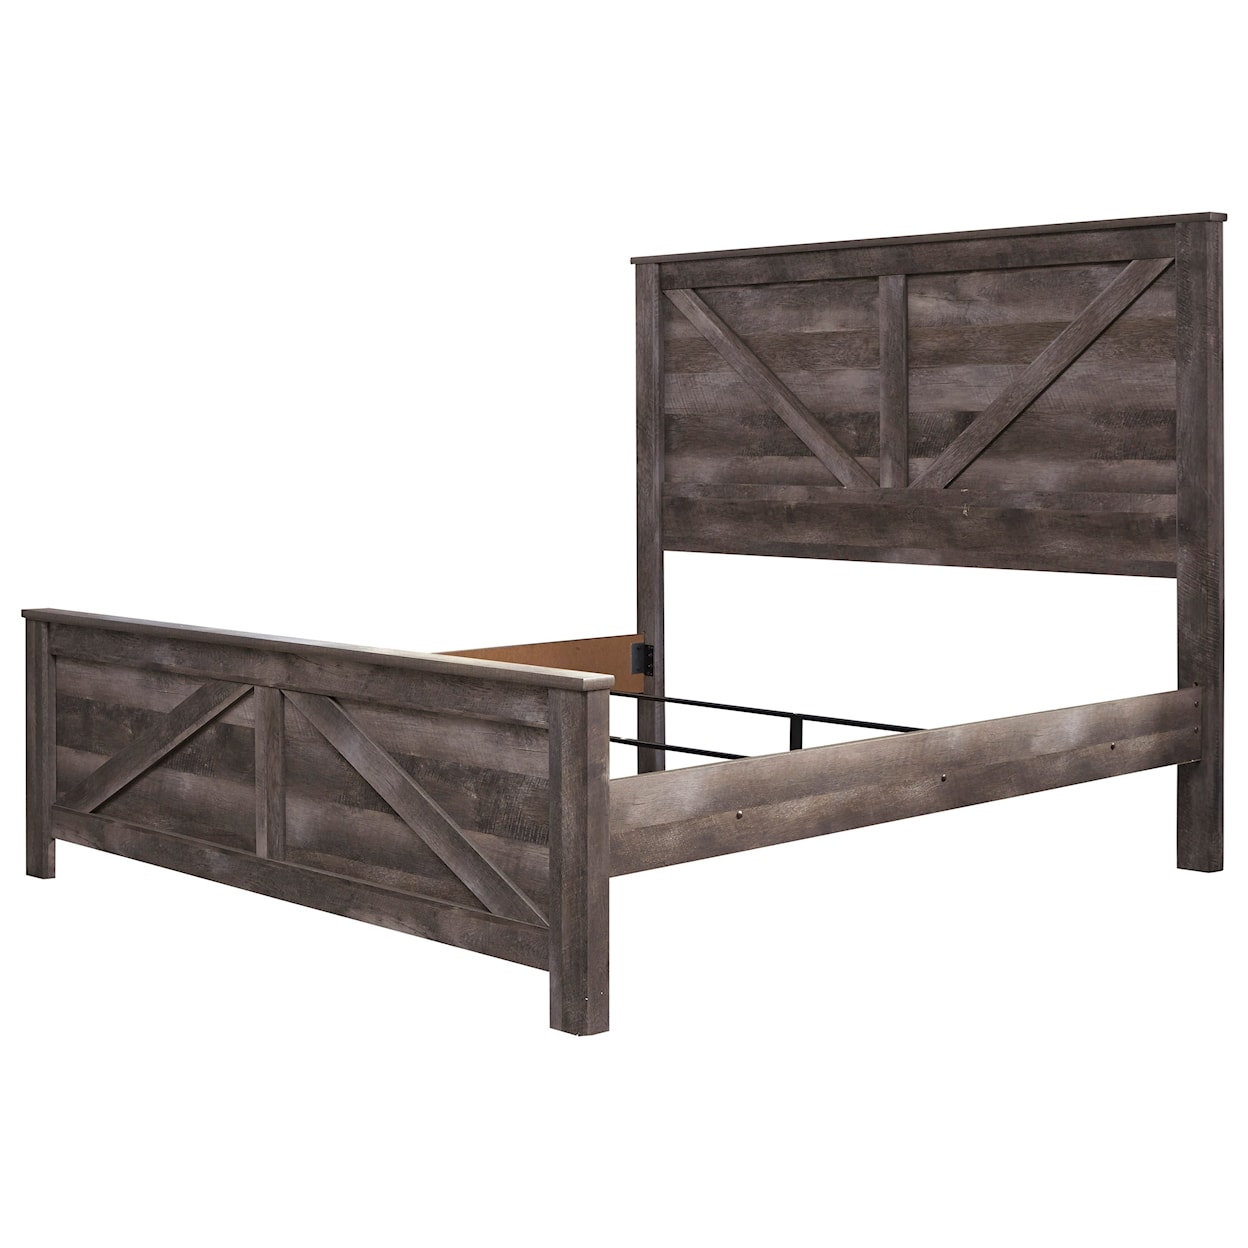 Signature Design by Ashley Furniture Wynnlow King Crossbuck Panel Bed